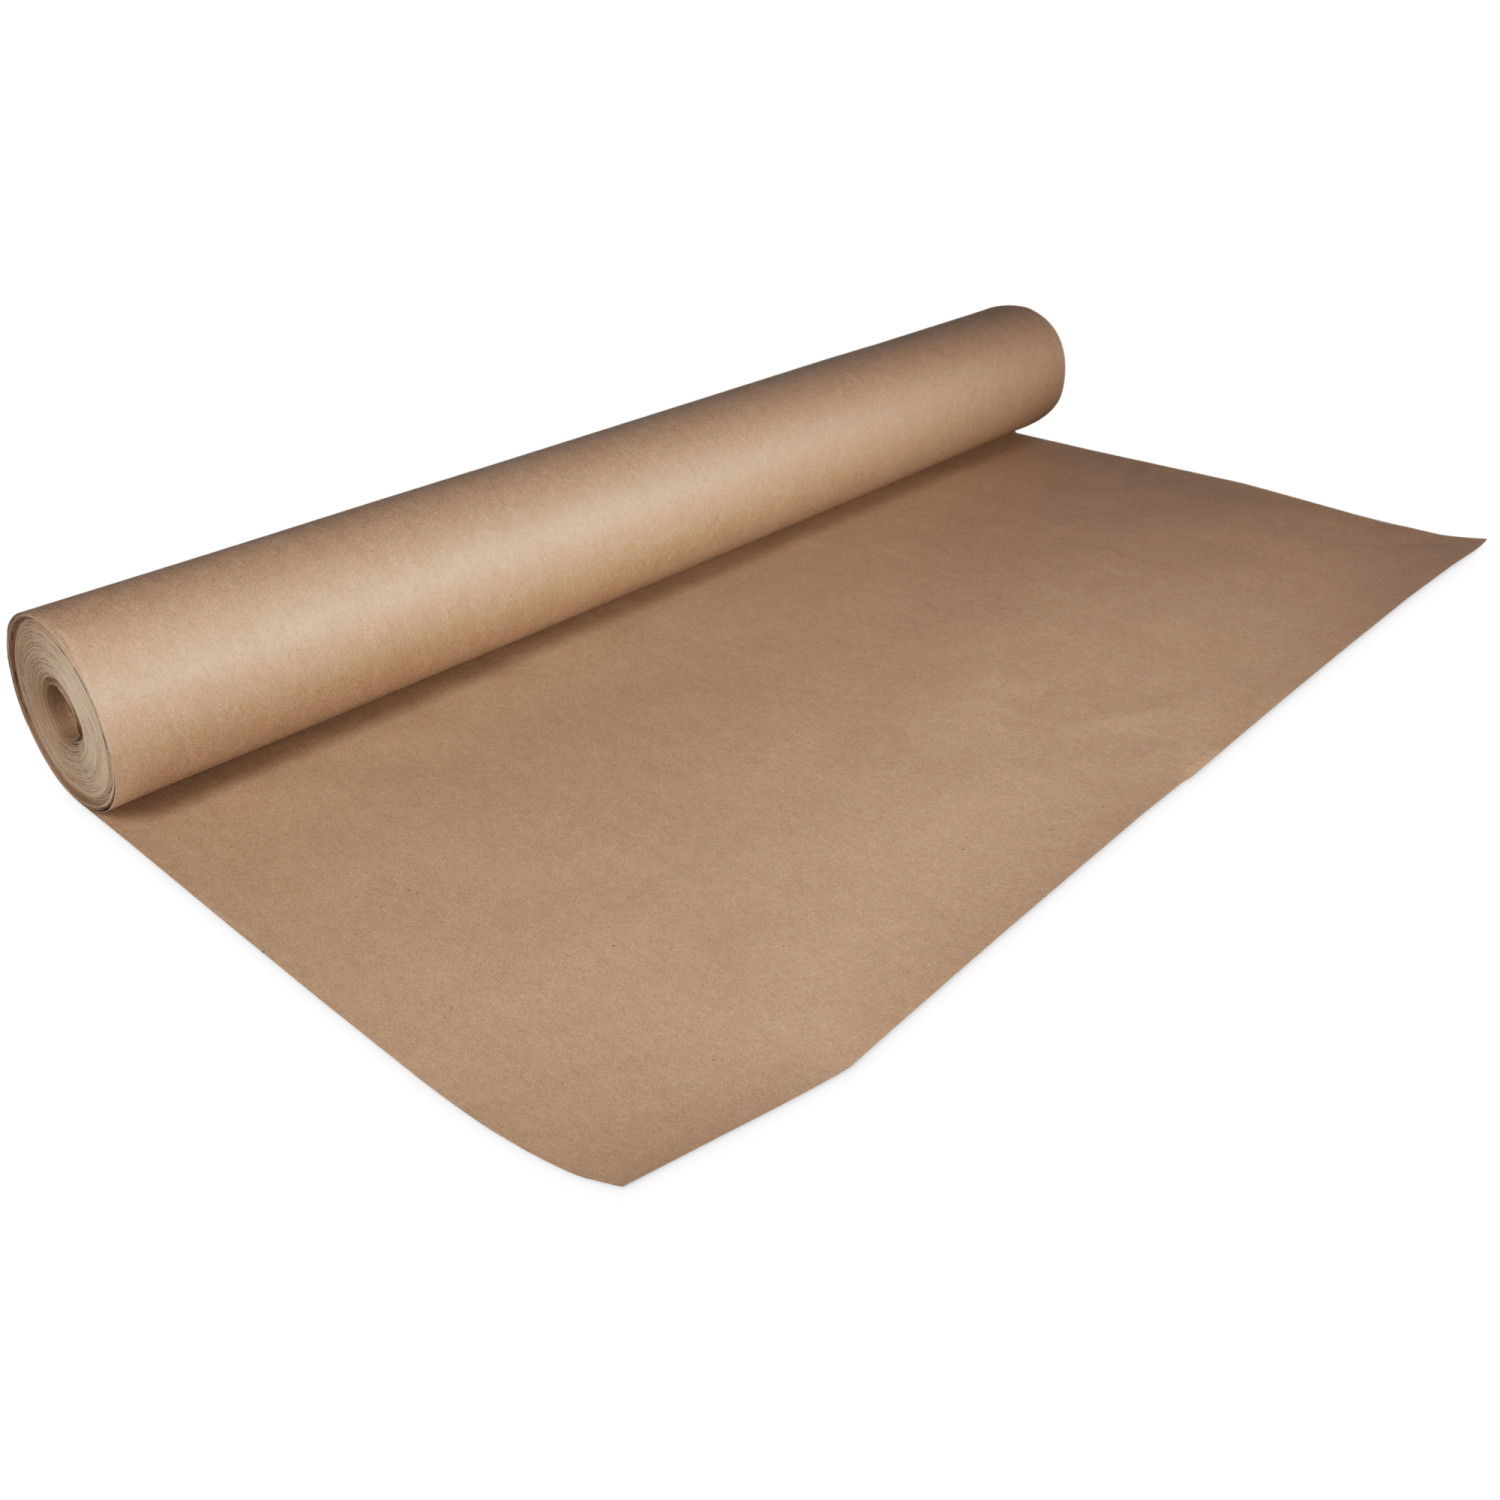 IDL Packaging 36 x 150 feet (1800 inches) Brown Kraft Paper Roll, 50 lbs  (Pack of 2) - Heavy Duty Paper for Packing, Moving, Sh